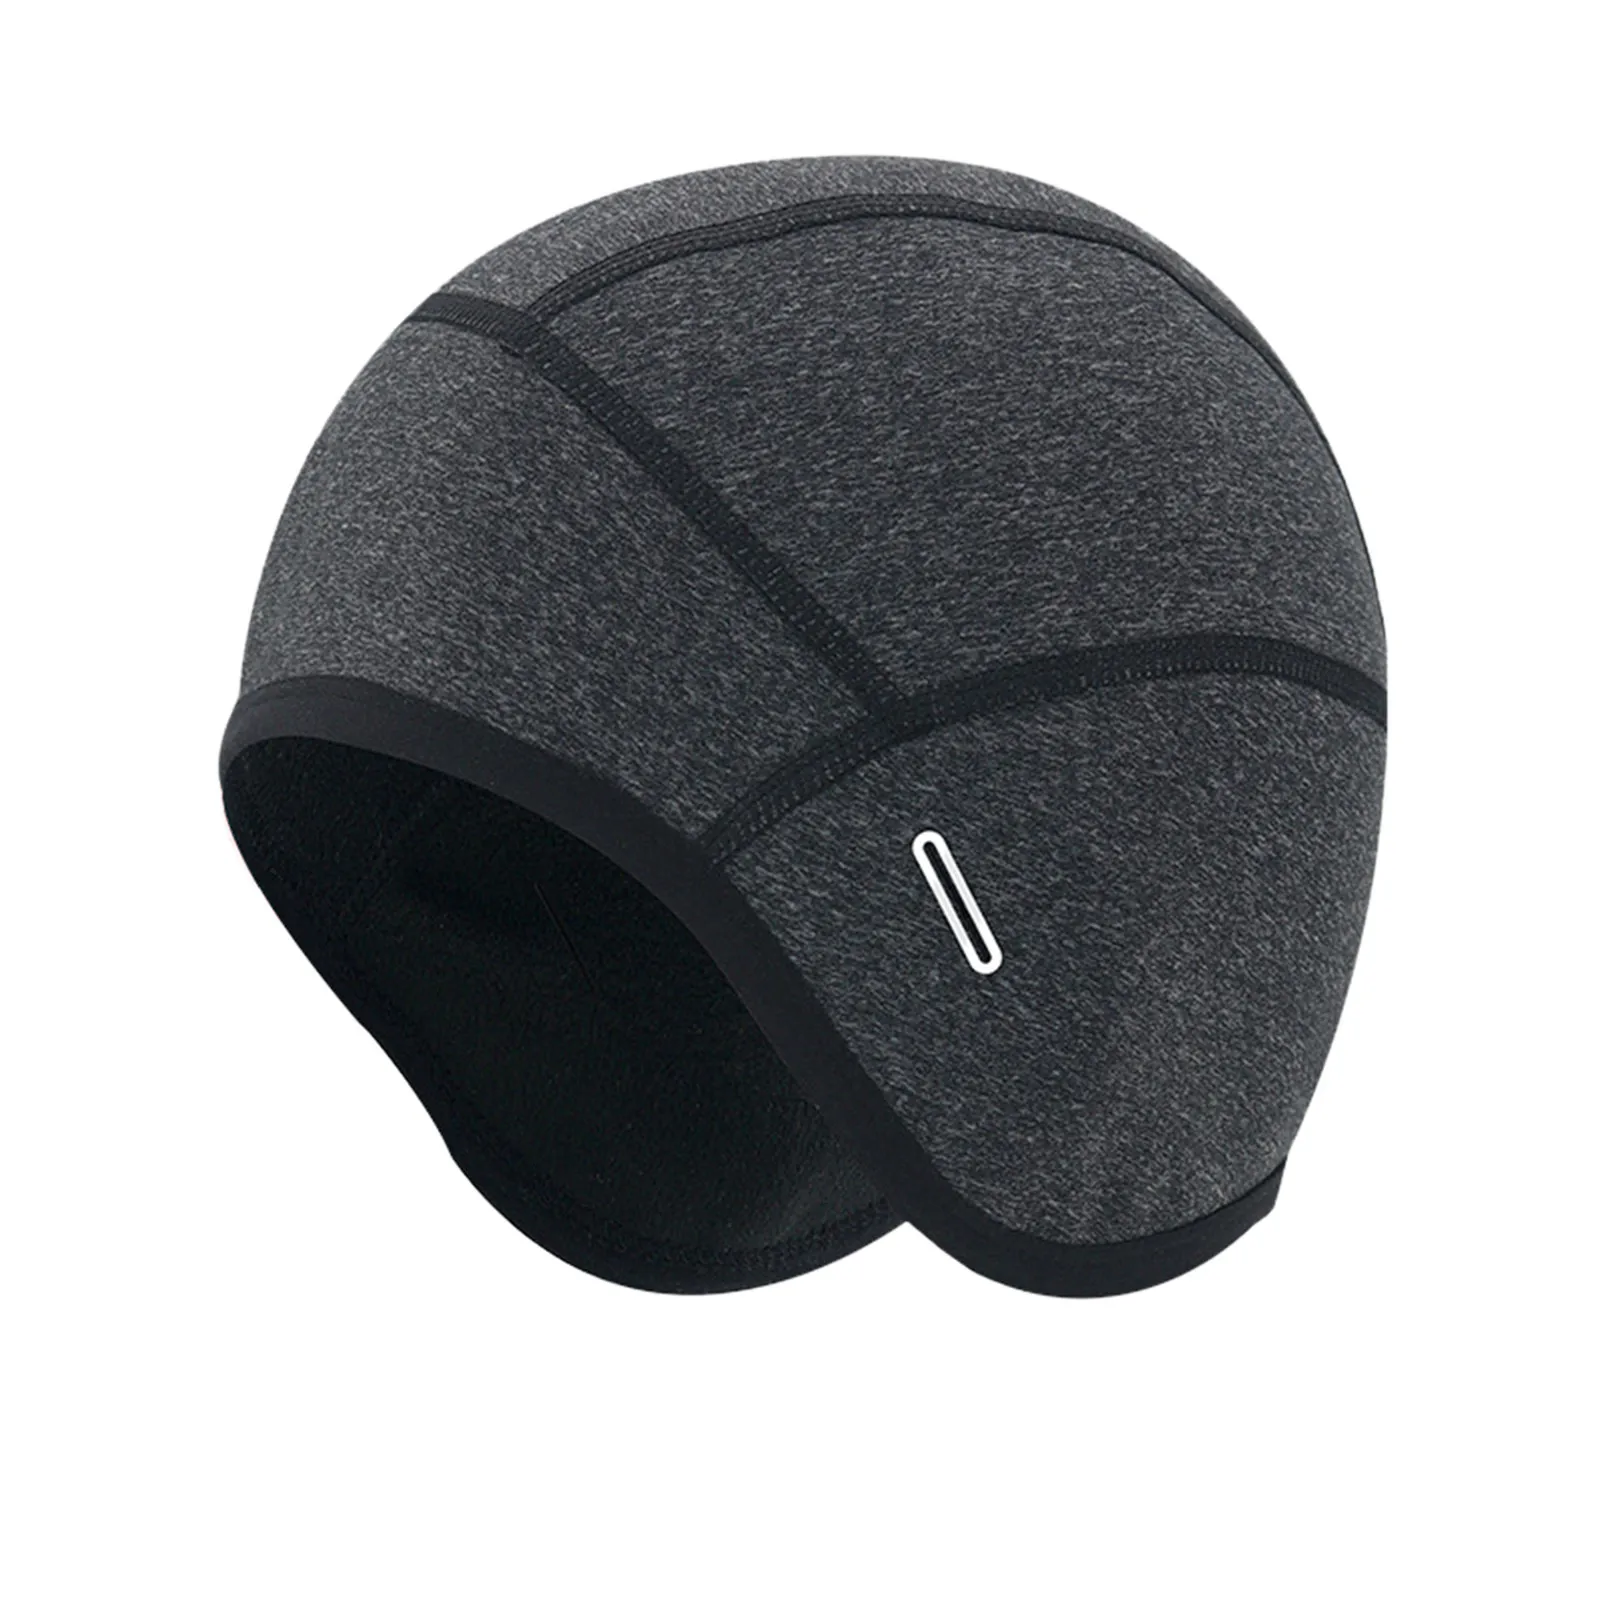 ladies ball caps Riding Ears Women Windproof Cycle Under Adults Hats Running Skull Outdoor Beanie Hats Sports Climbing Cycling For And Men cute baseball caps for women